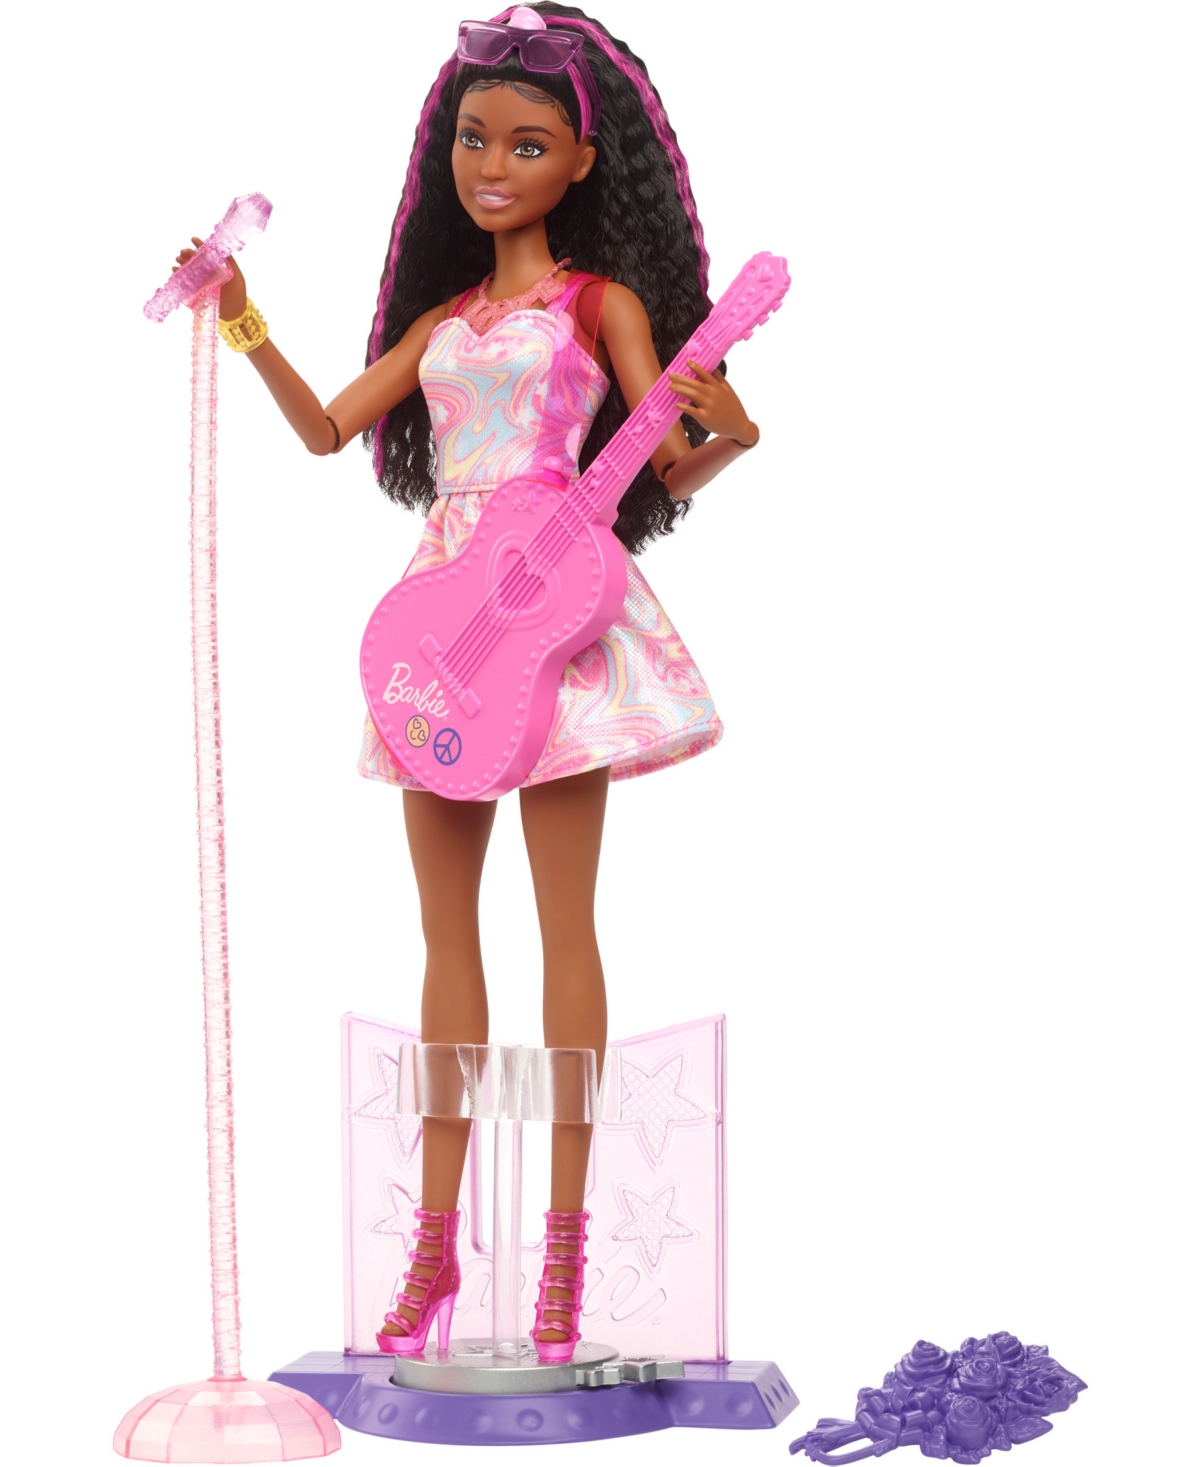 Barbie Kids' 65th Anniversary Careers Pop Star Doll And 10 Accessories Including Stage With Movement Feature In Multi